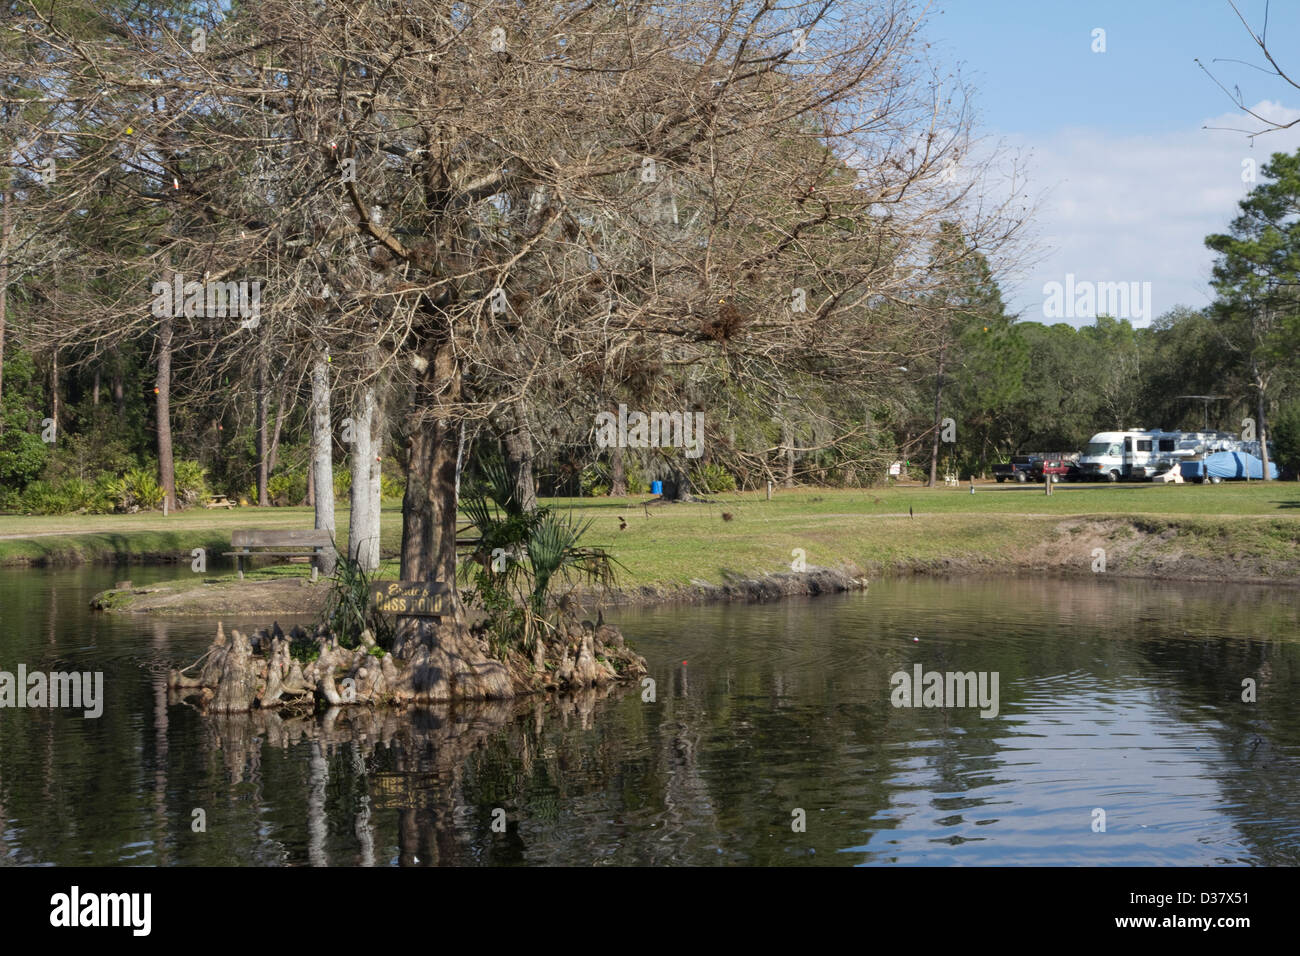 Highland Park Fish Camp offers RV camping -- and great fishing -- in a rustic, 'Old Florida' setting, near Deland, Florida Stock Photo